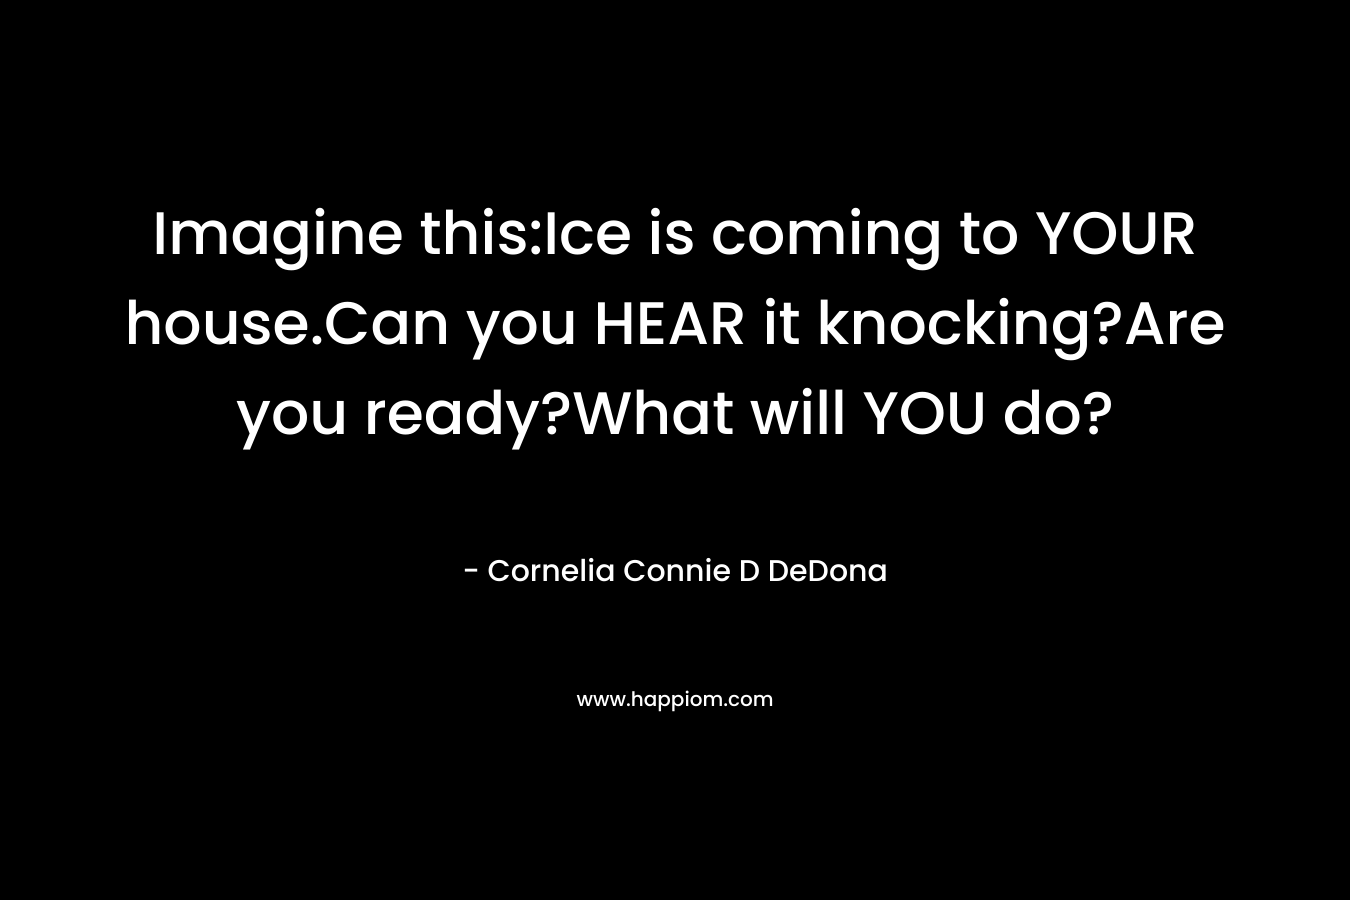 Imagine this:Ice is coming to YOUR house.Can you HEAR it knocking?Are you ready?What will YOU do?